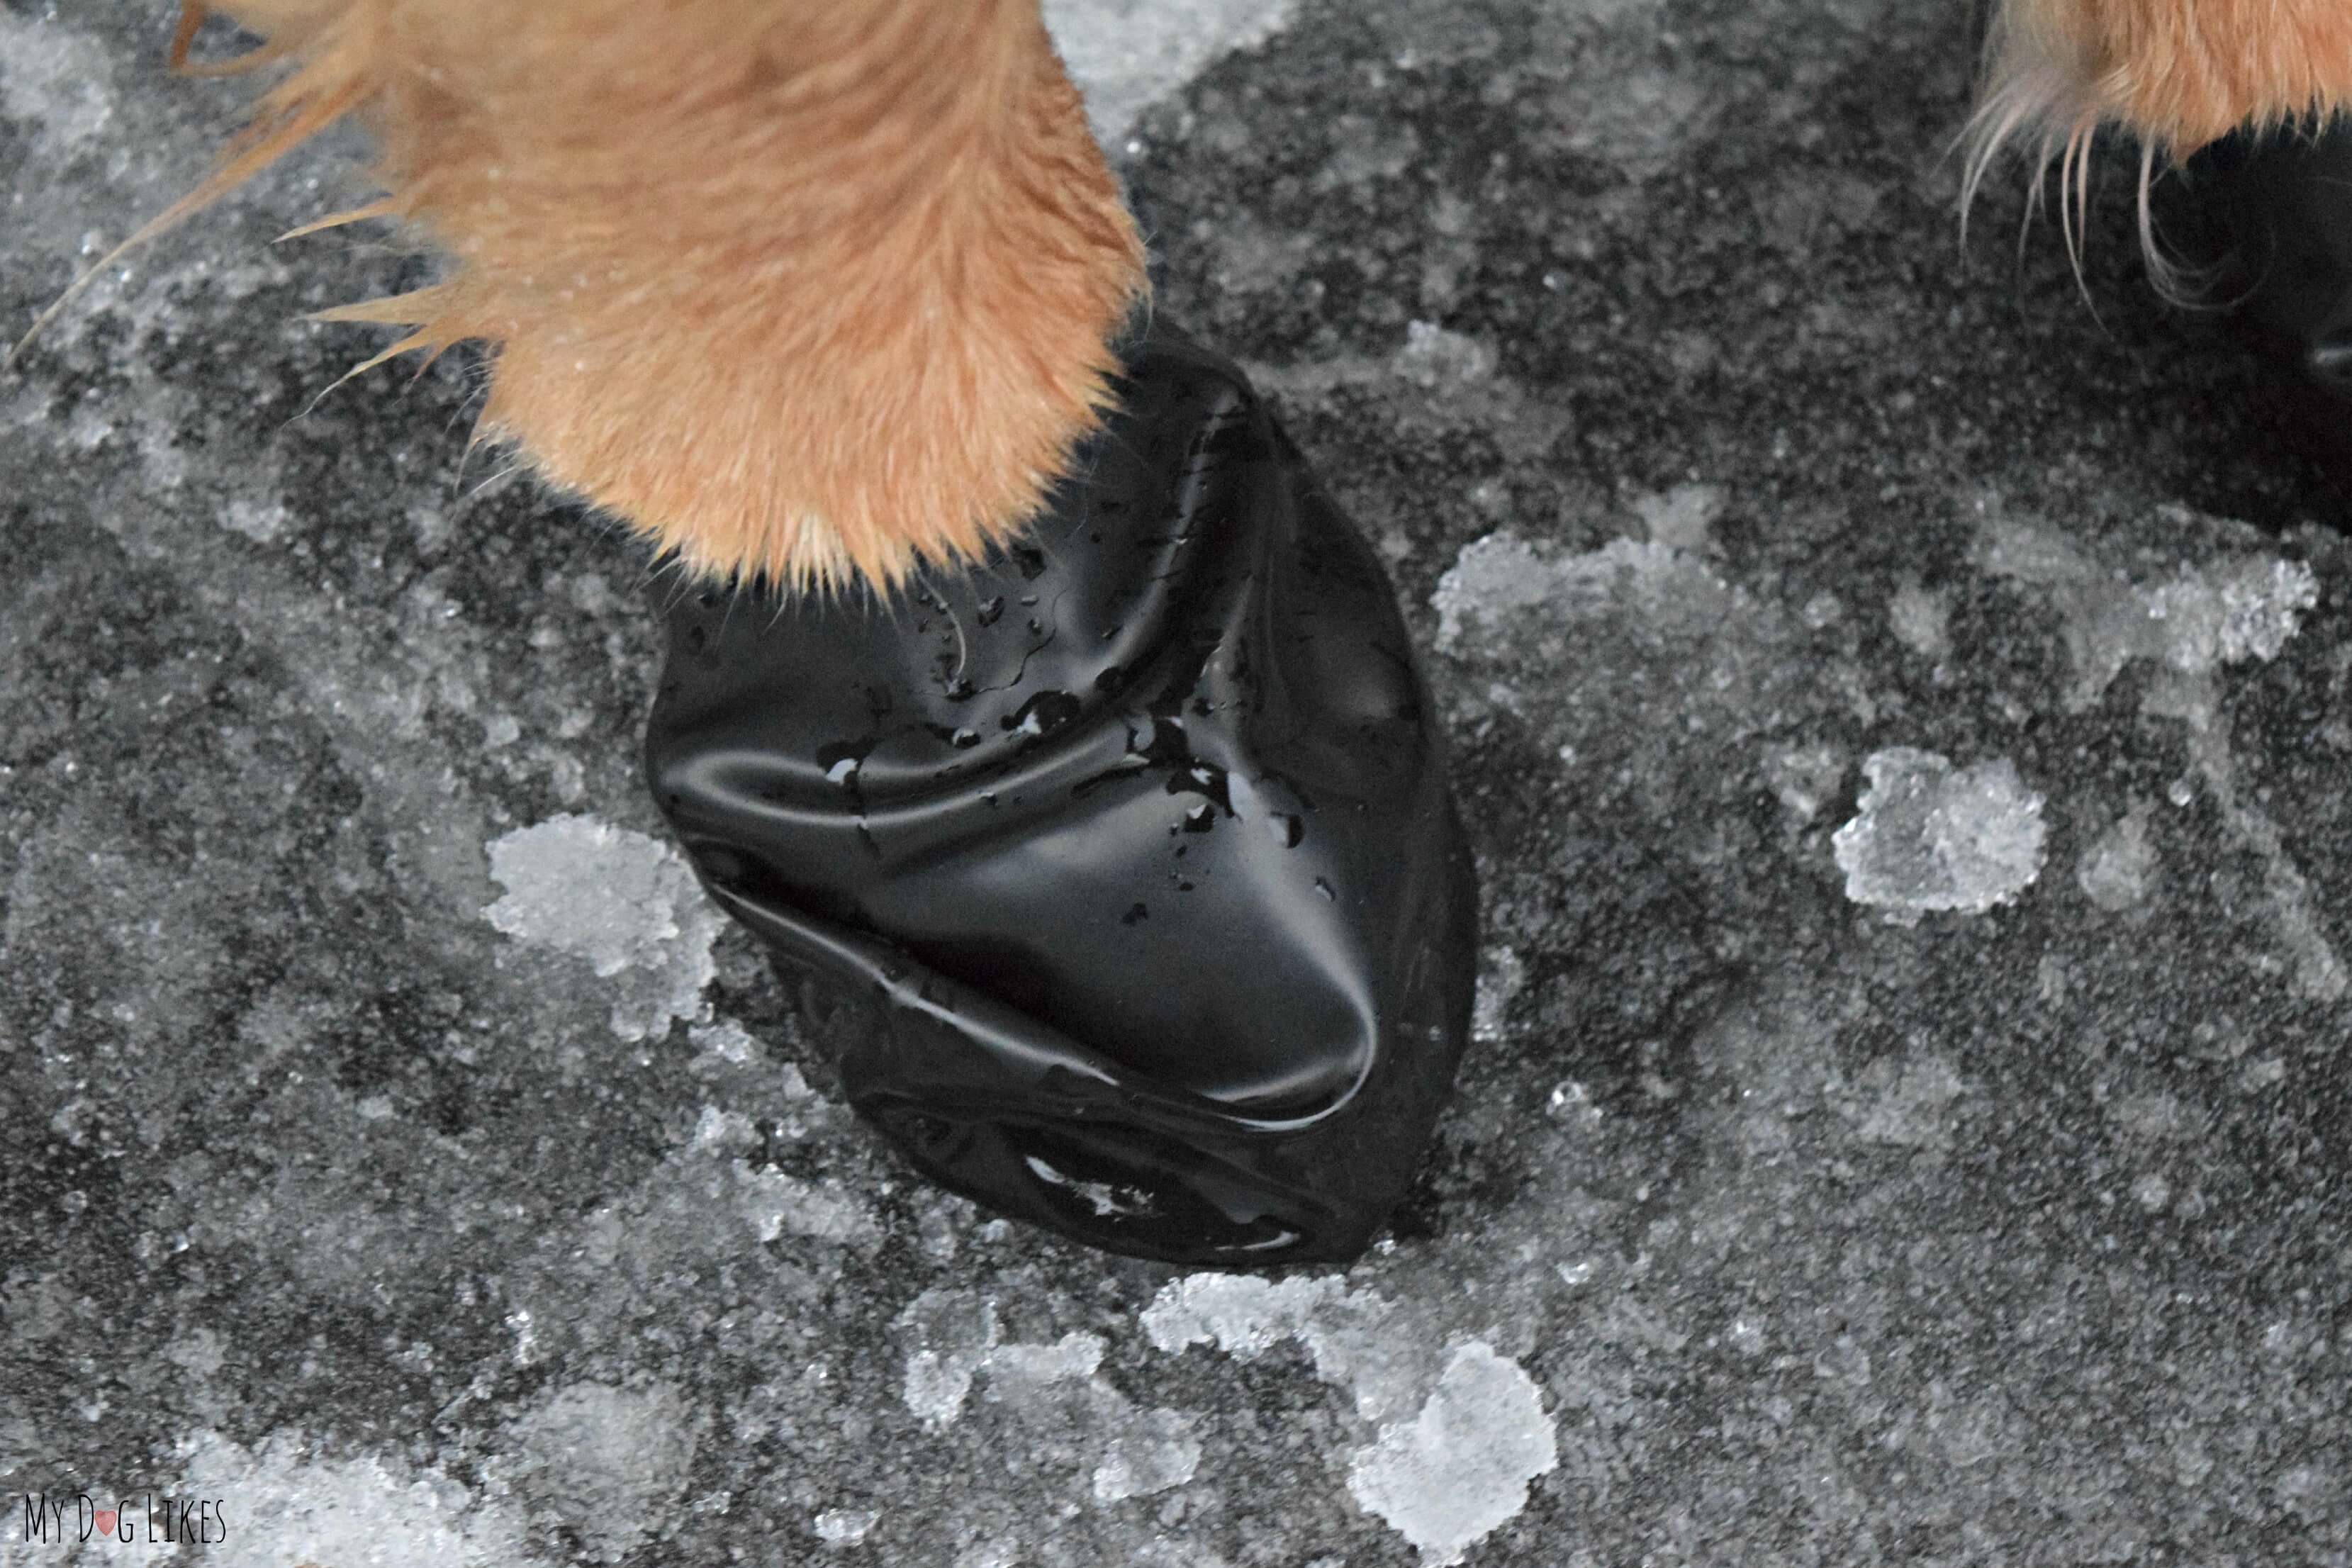 Protect your dog's paws on icy sidewalks